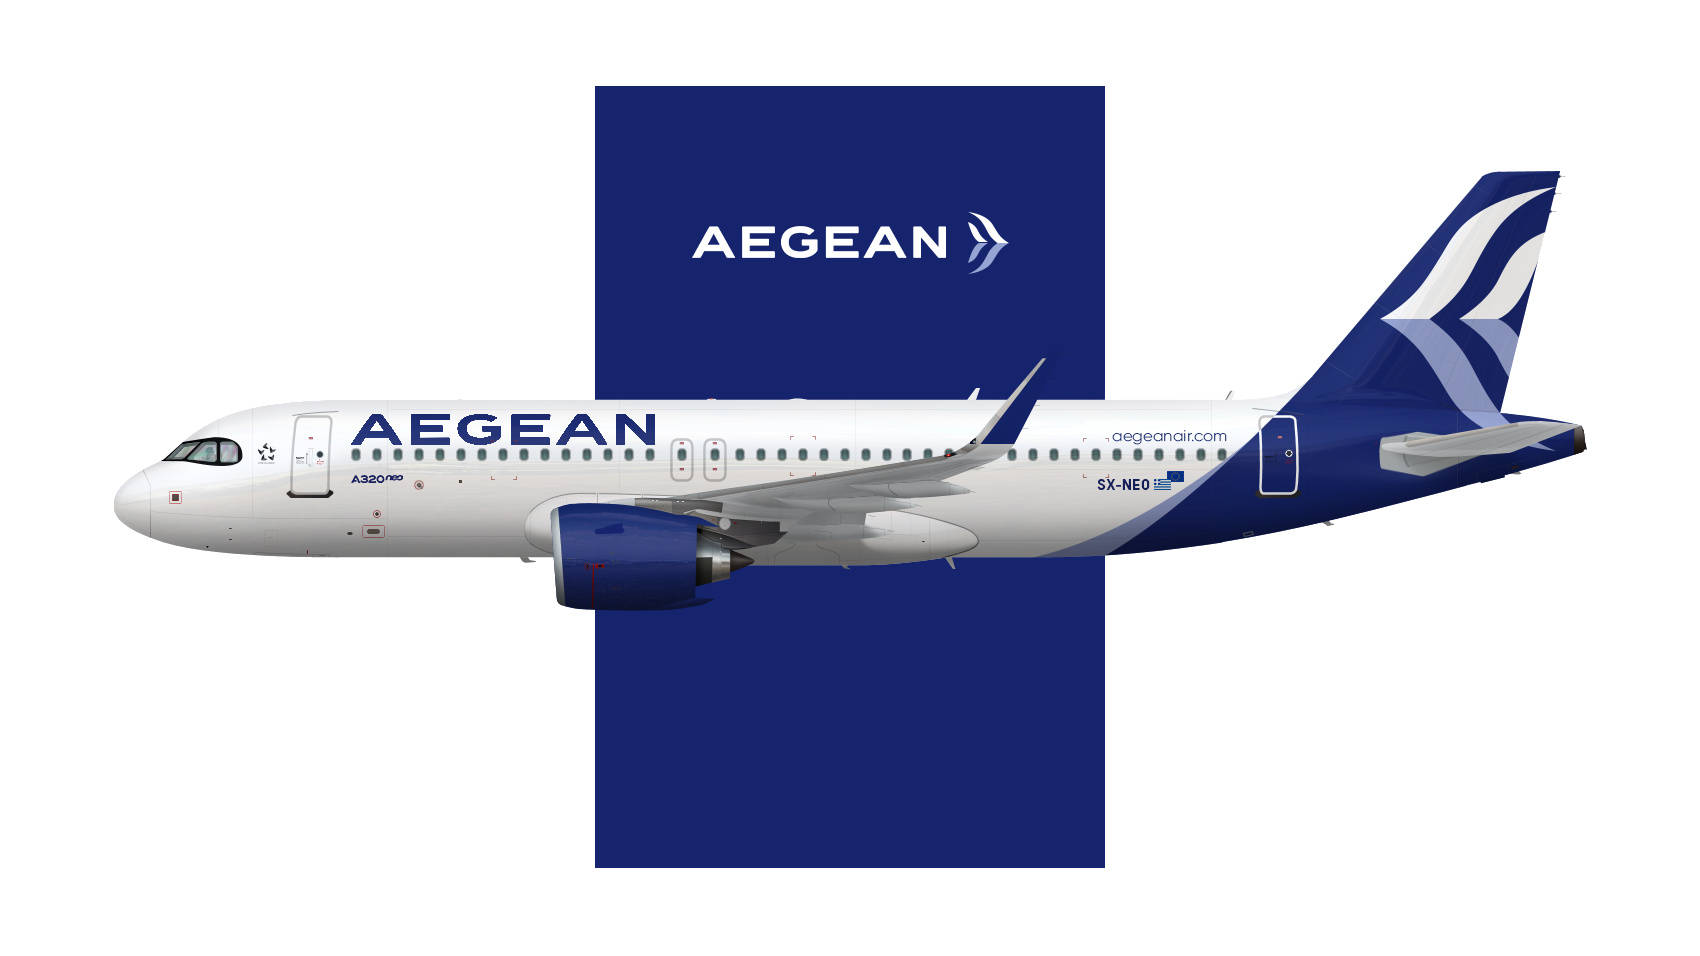 Aegean Airlines Flag Carrier Logo And A320 Plane Wallpaper